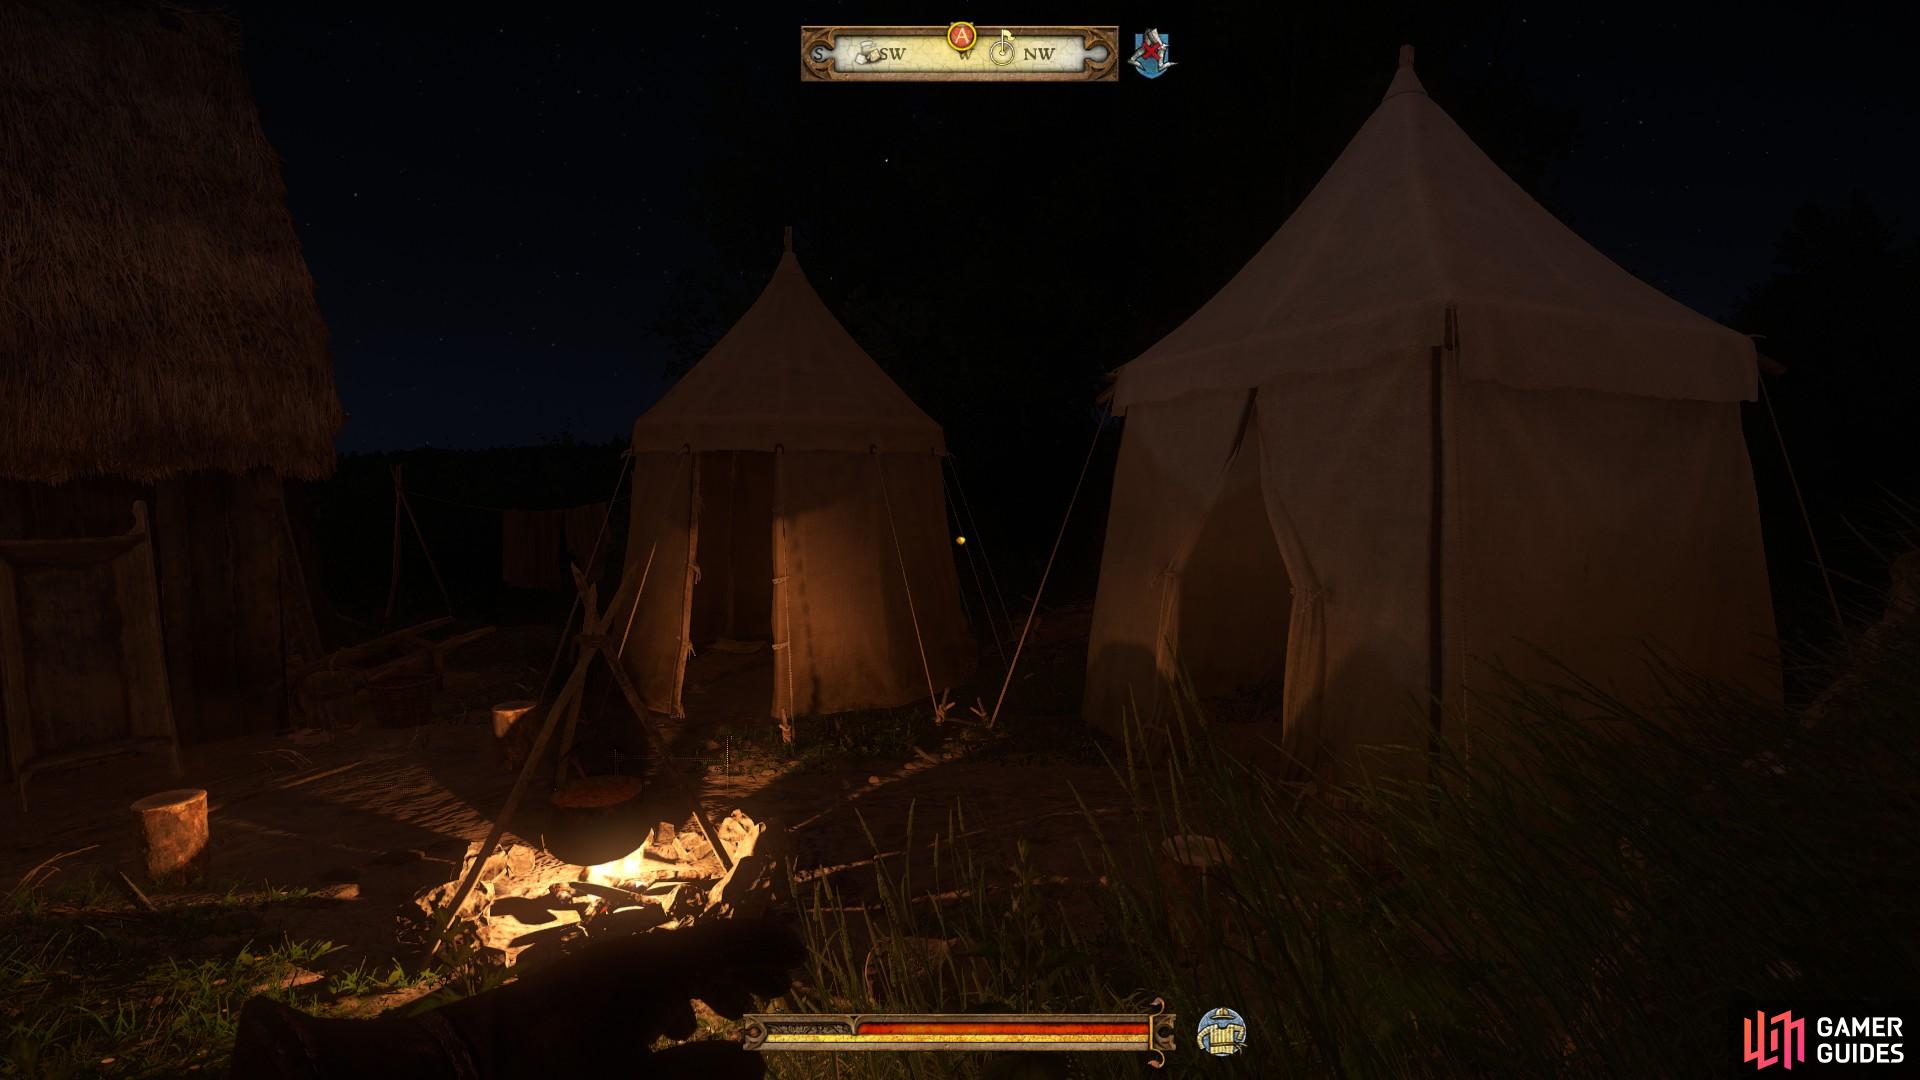 The executioner's sword can be found in the small tent on the left.